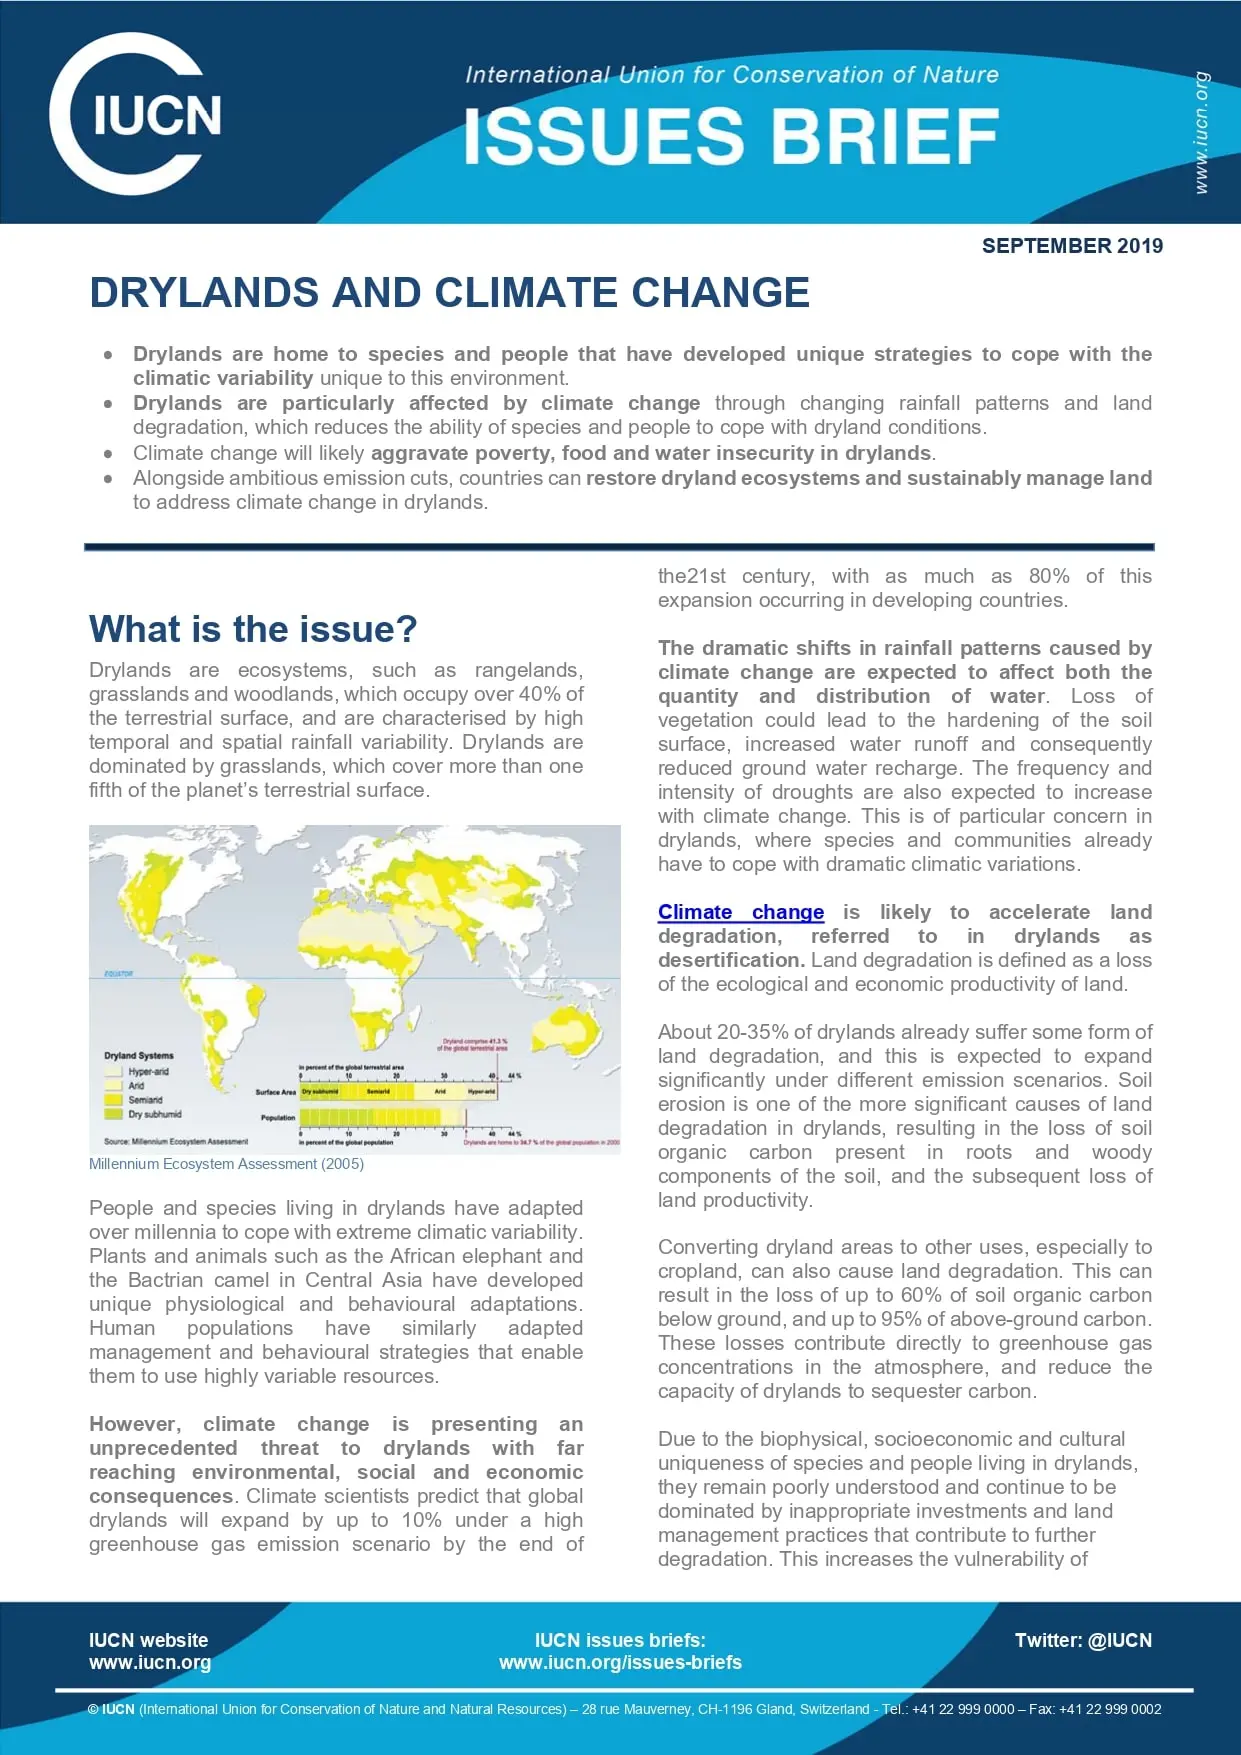 Drylands and Climate Change